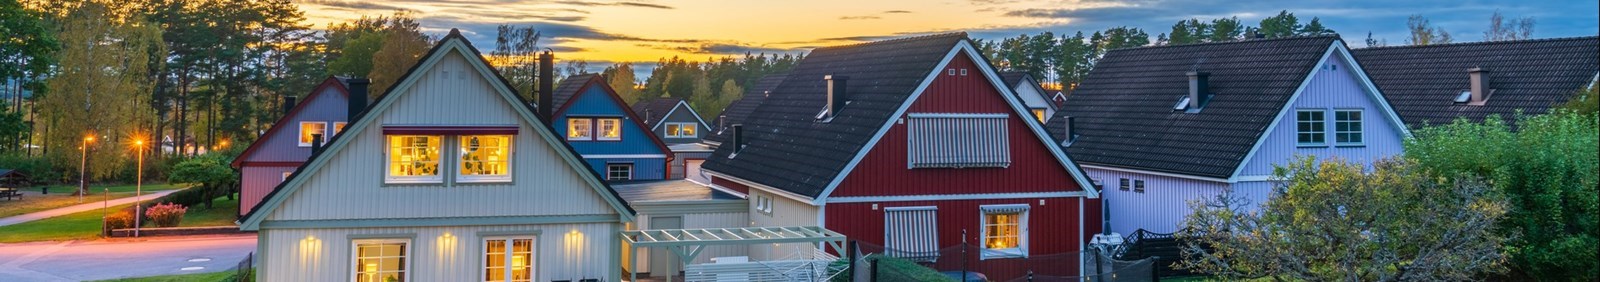 View of traditional Scandinavian timber houses in autumn season at sunset